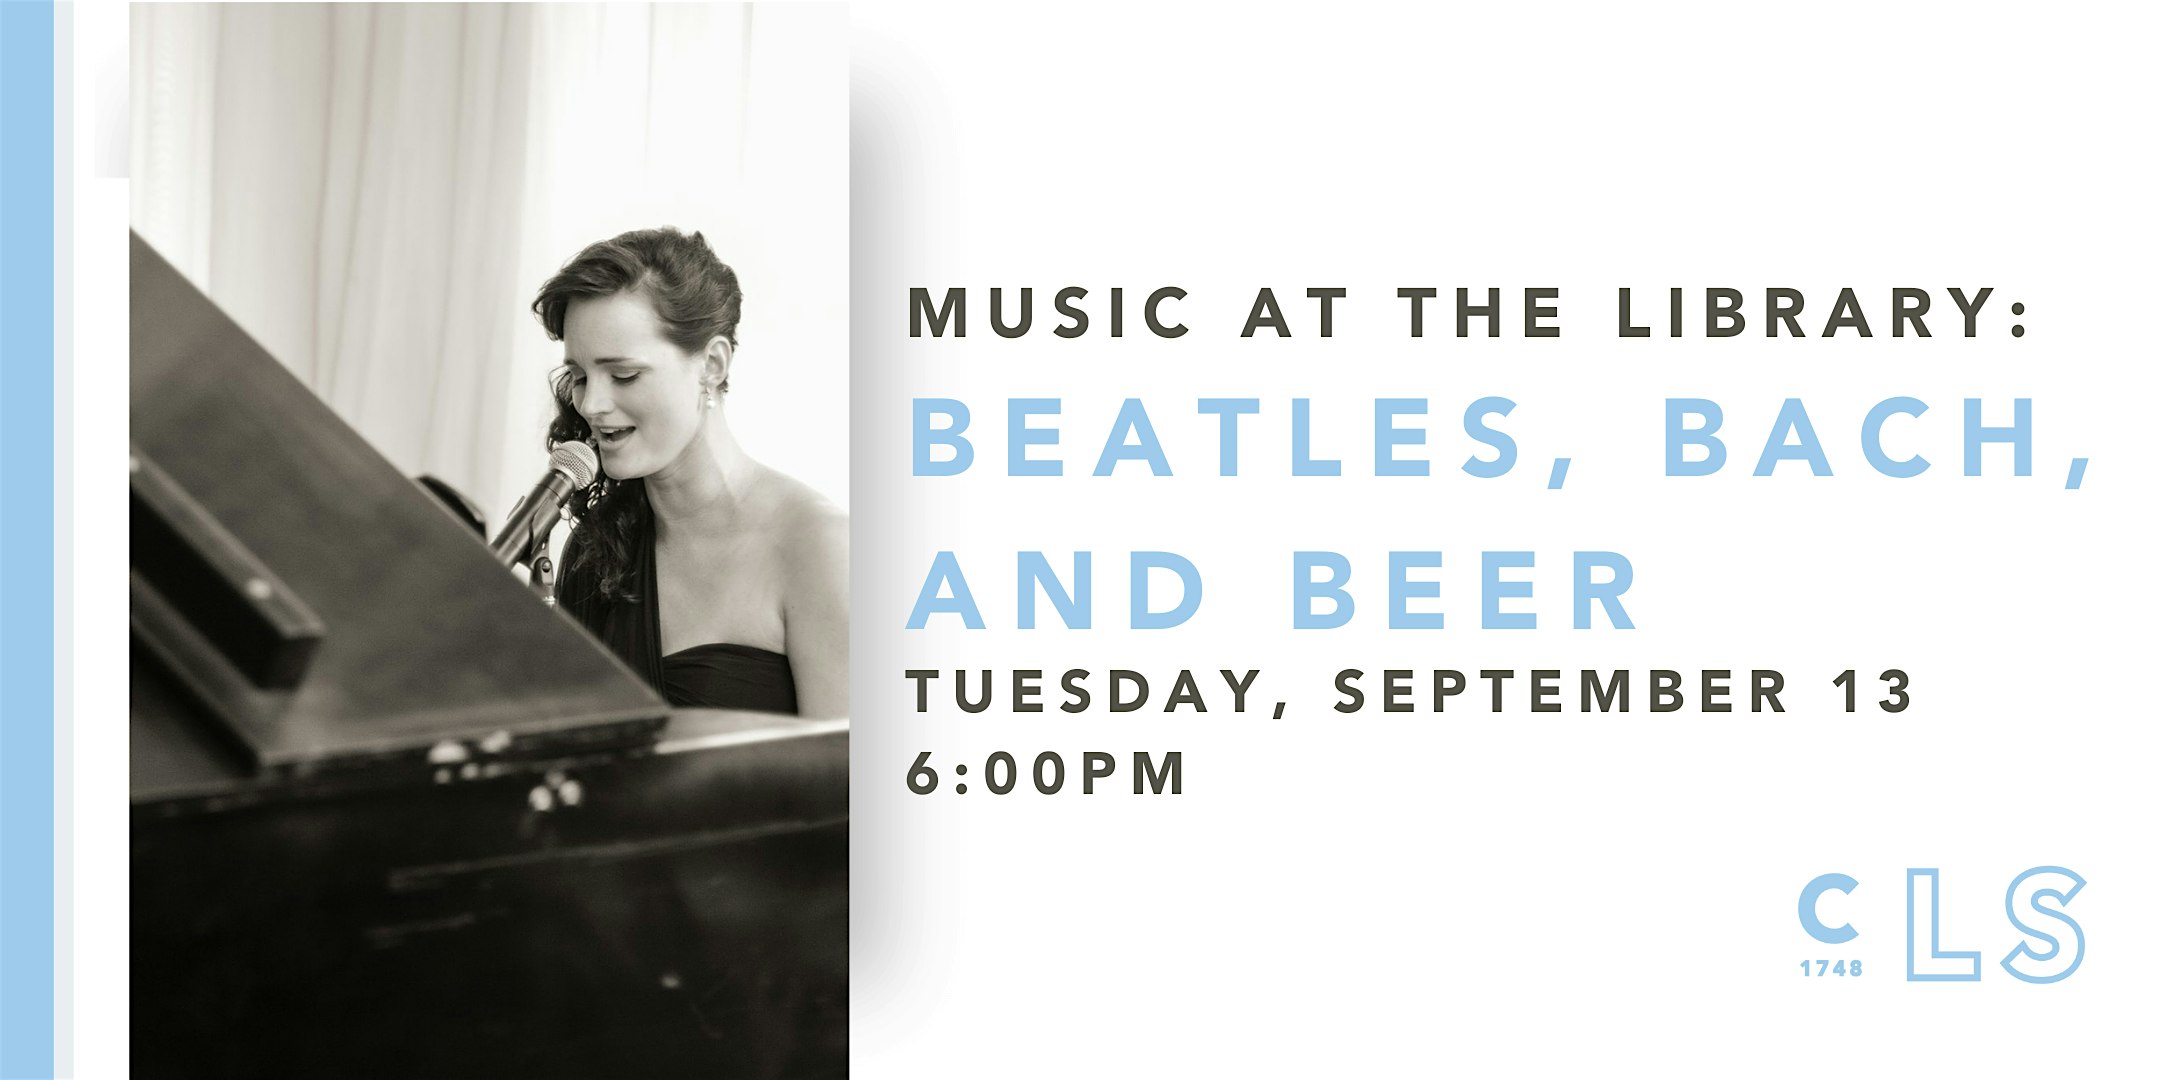 Music at the Library: Laura Ball & Friends - Beatles, Bach, & Beer